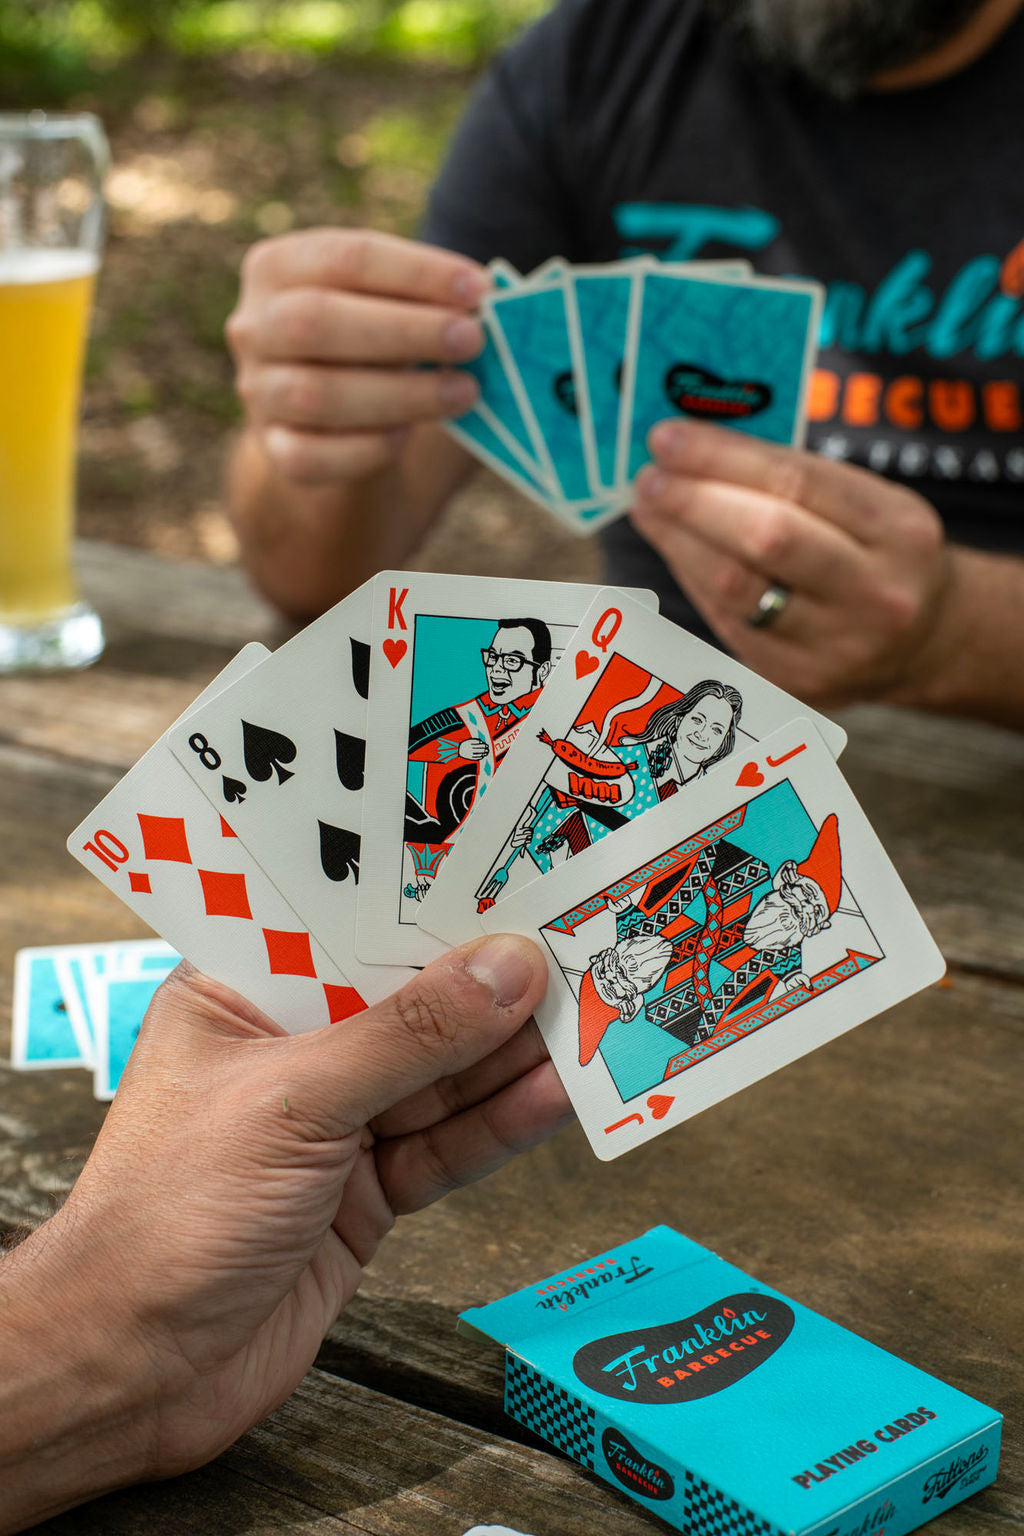 Two people playing cards. We see the hand of one which has a 10 of diamonds, an 8 of spades, The King as portrayed by Aaron Franklin, the Queen as portrayed by Stacy Franklin and the Franklin gnome as the Jack.